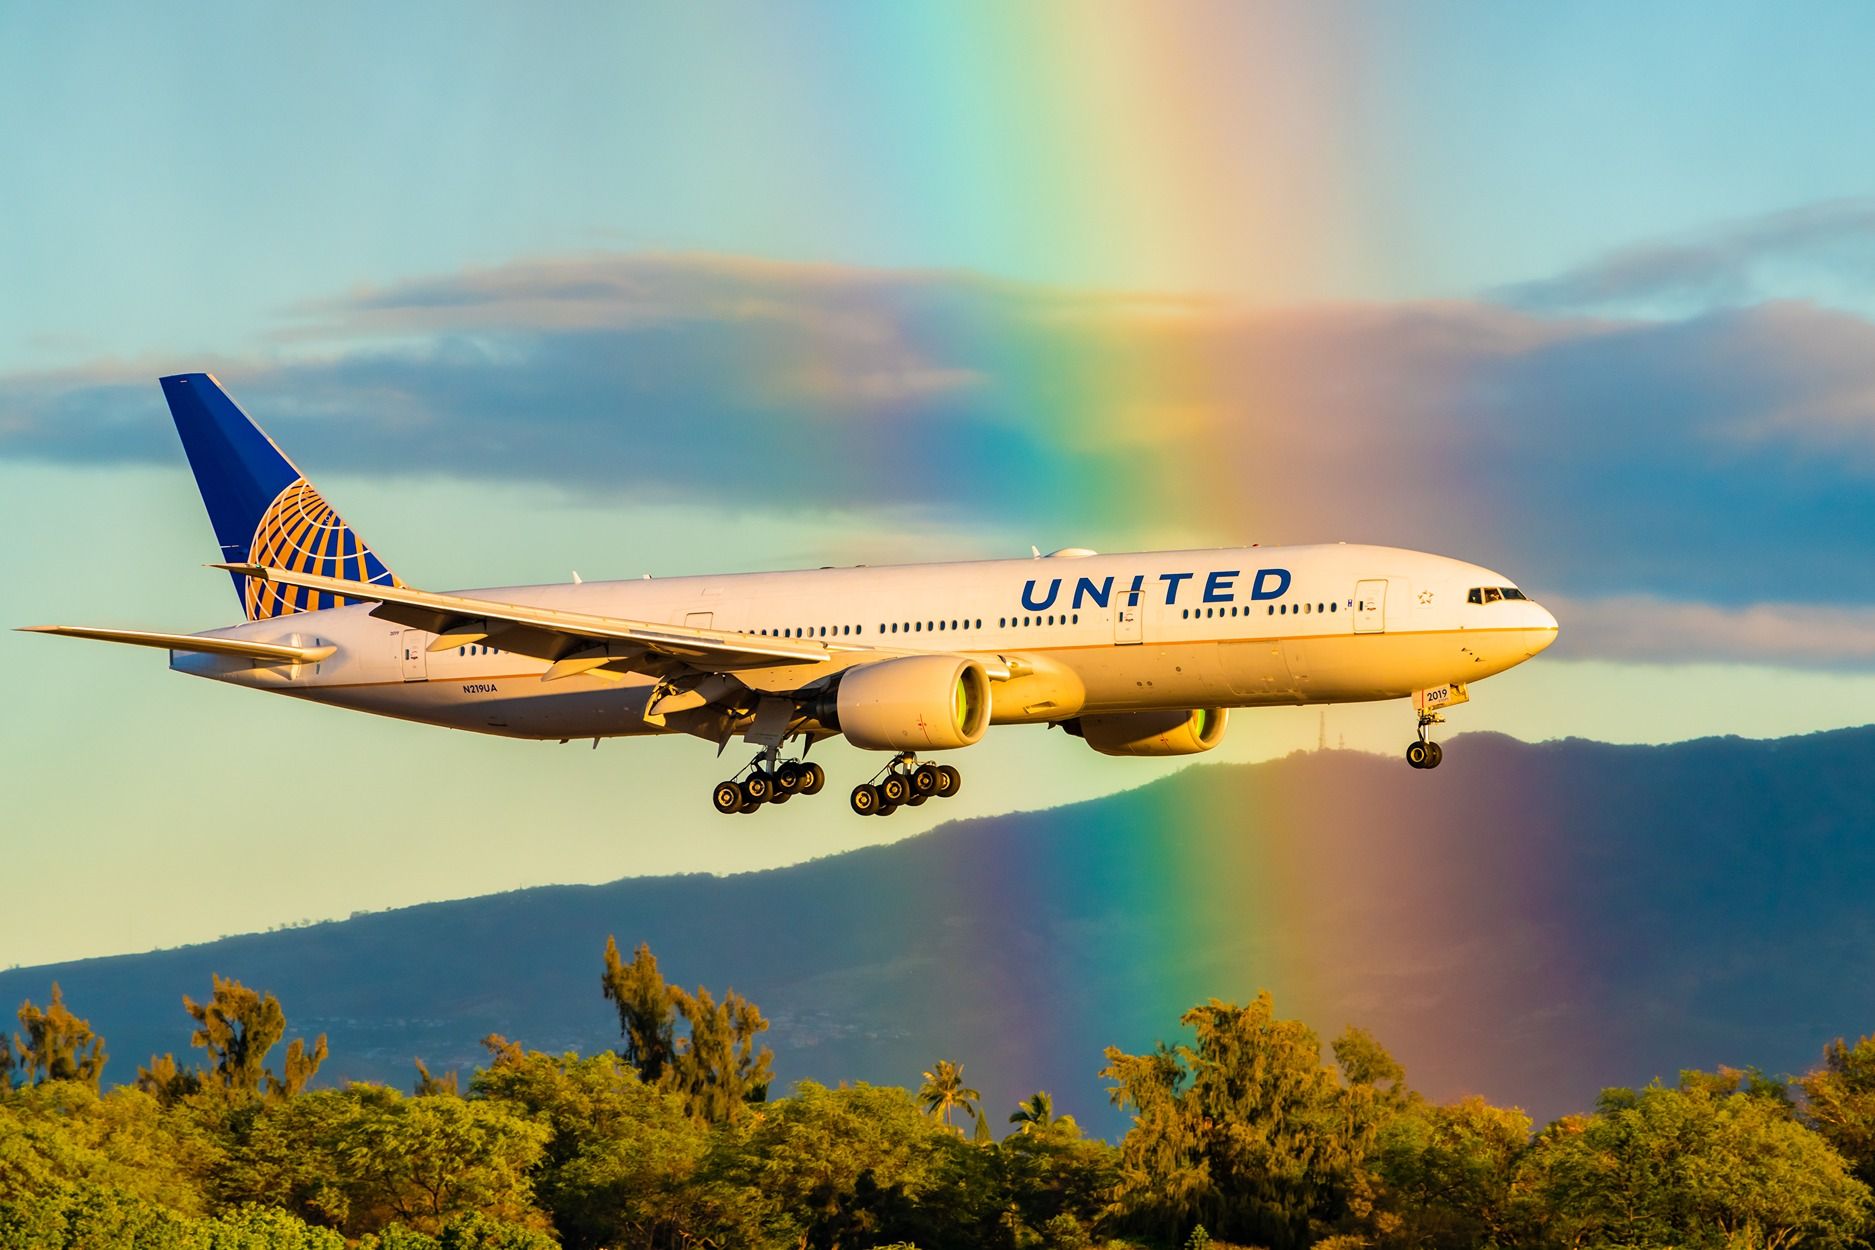 A United Airlines Boeing 777-200 about to land with mountains and a rainbow in the background.